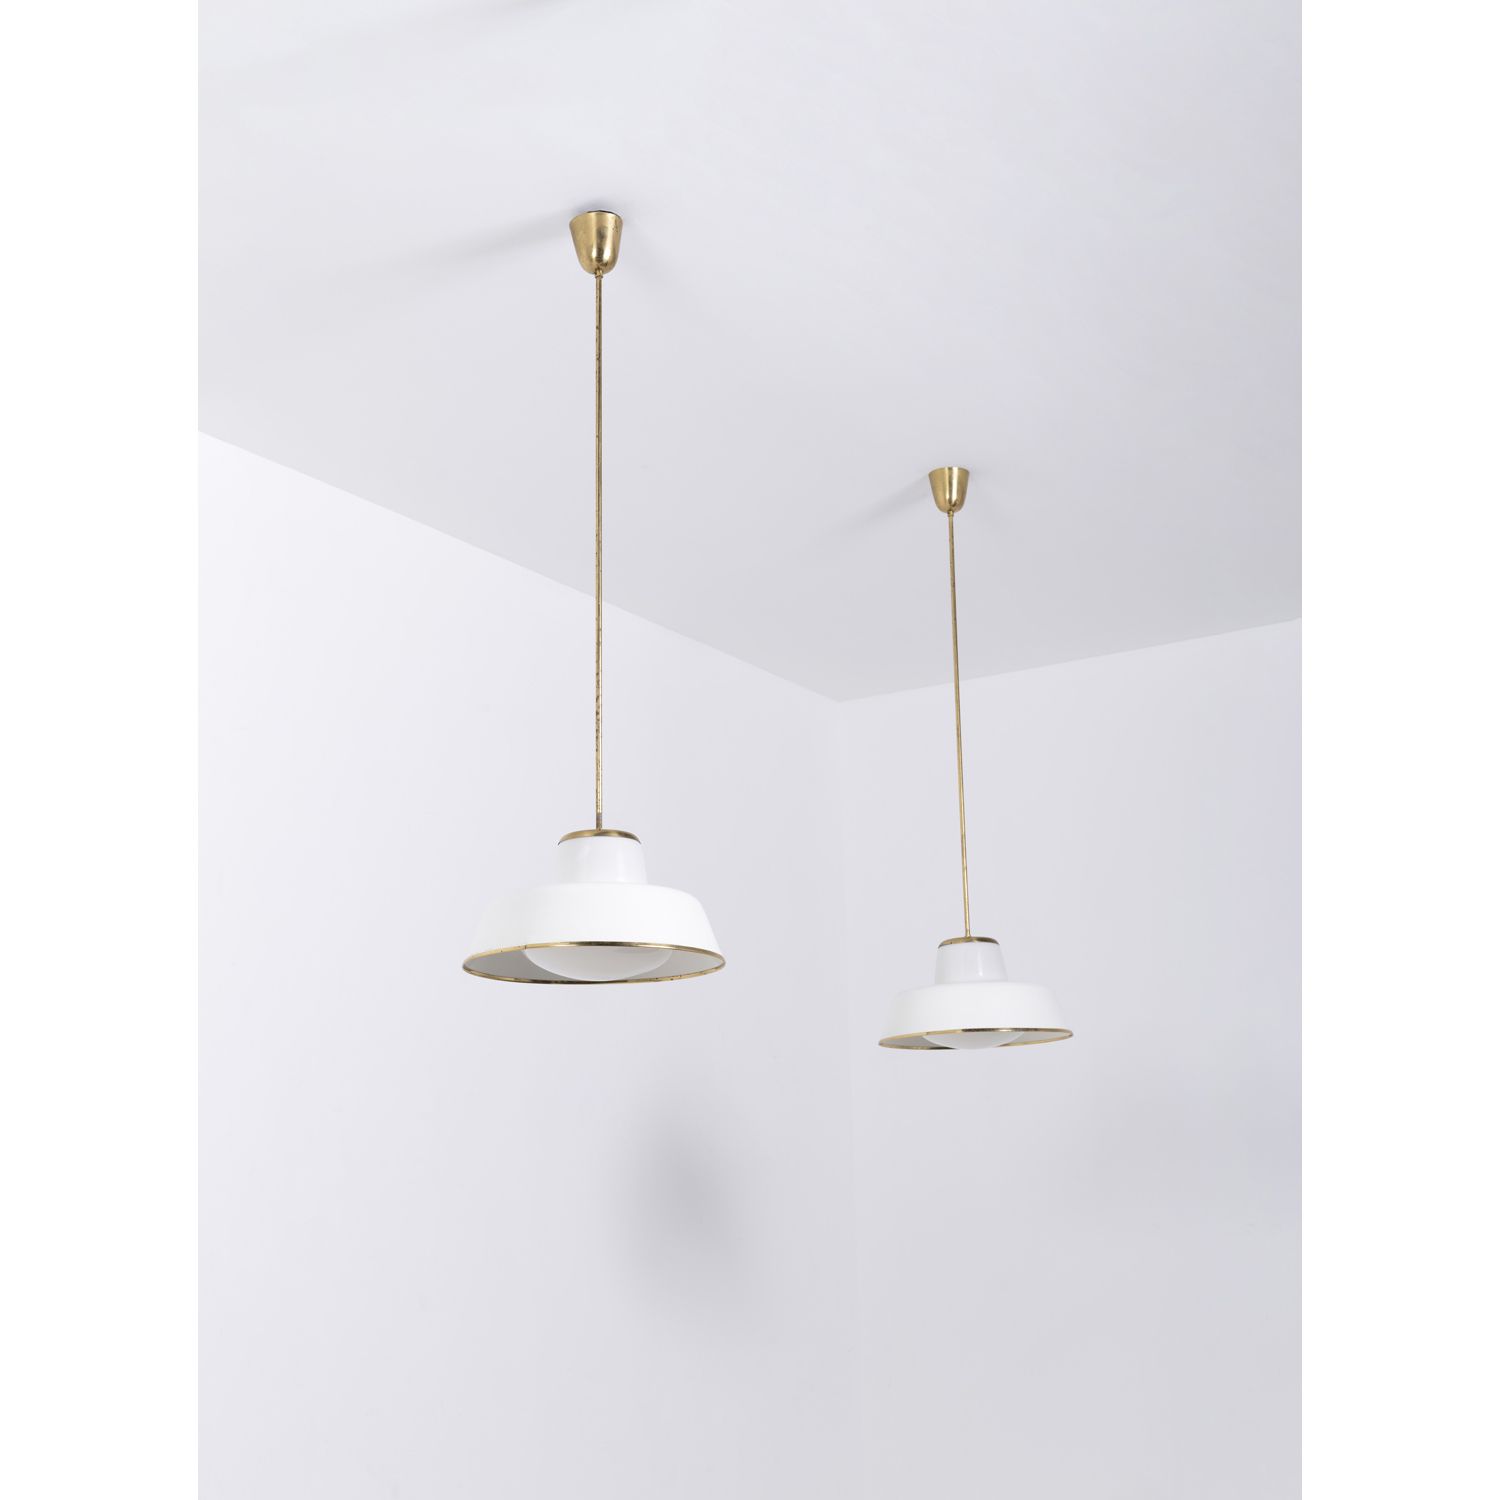 Null Lisa Johansson-Pape (1907-1989)

Pair of suspensions

Brass, lacquered meta&hellip;